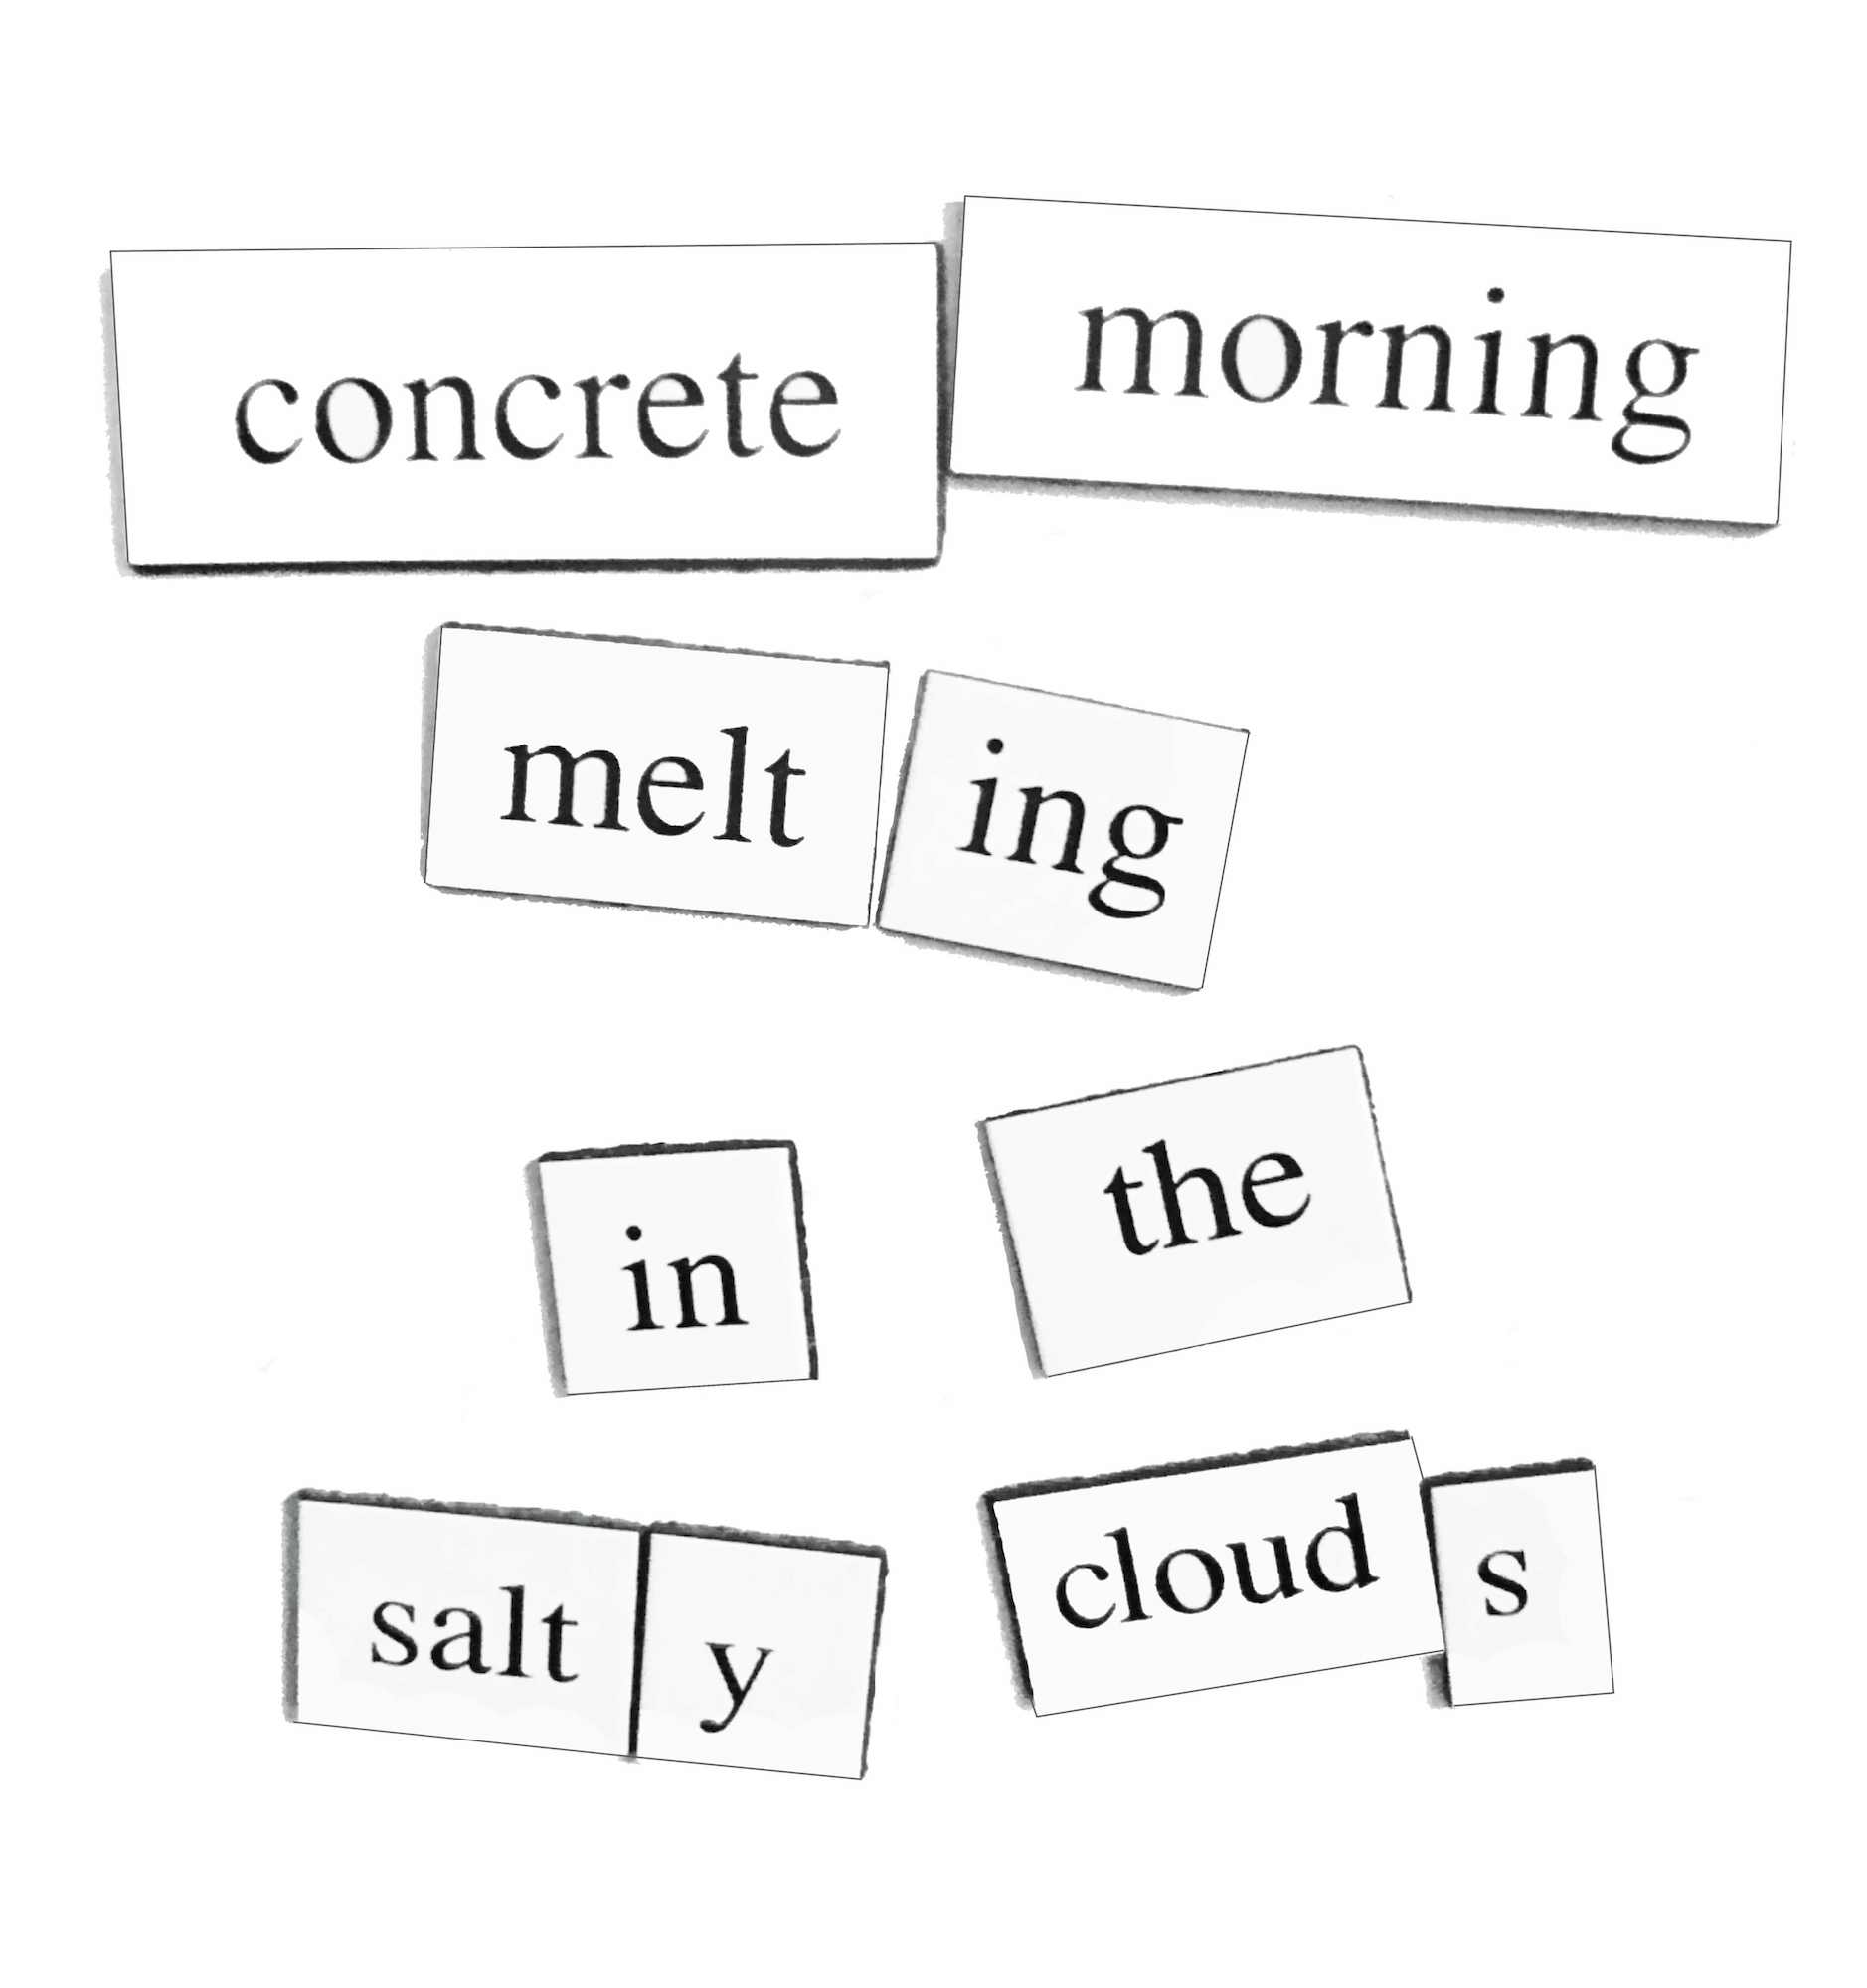 art every day number 692 fridge magnets text poetry janet bright